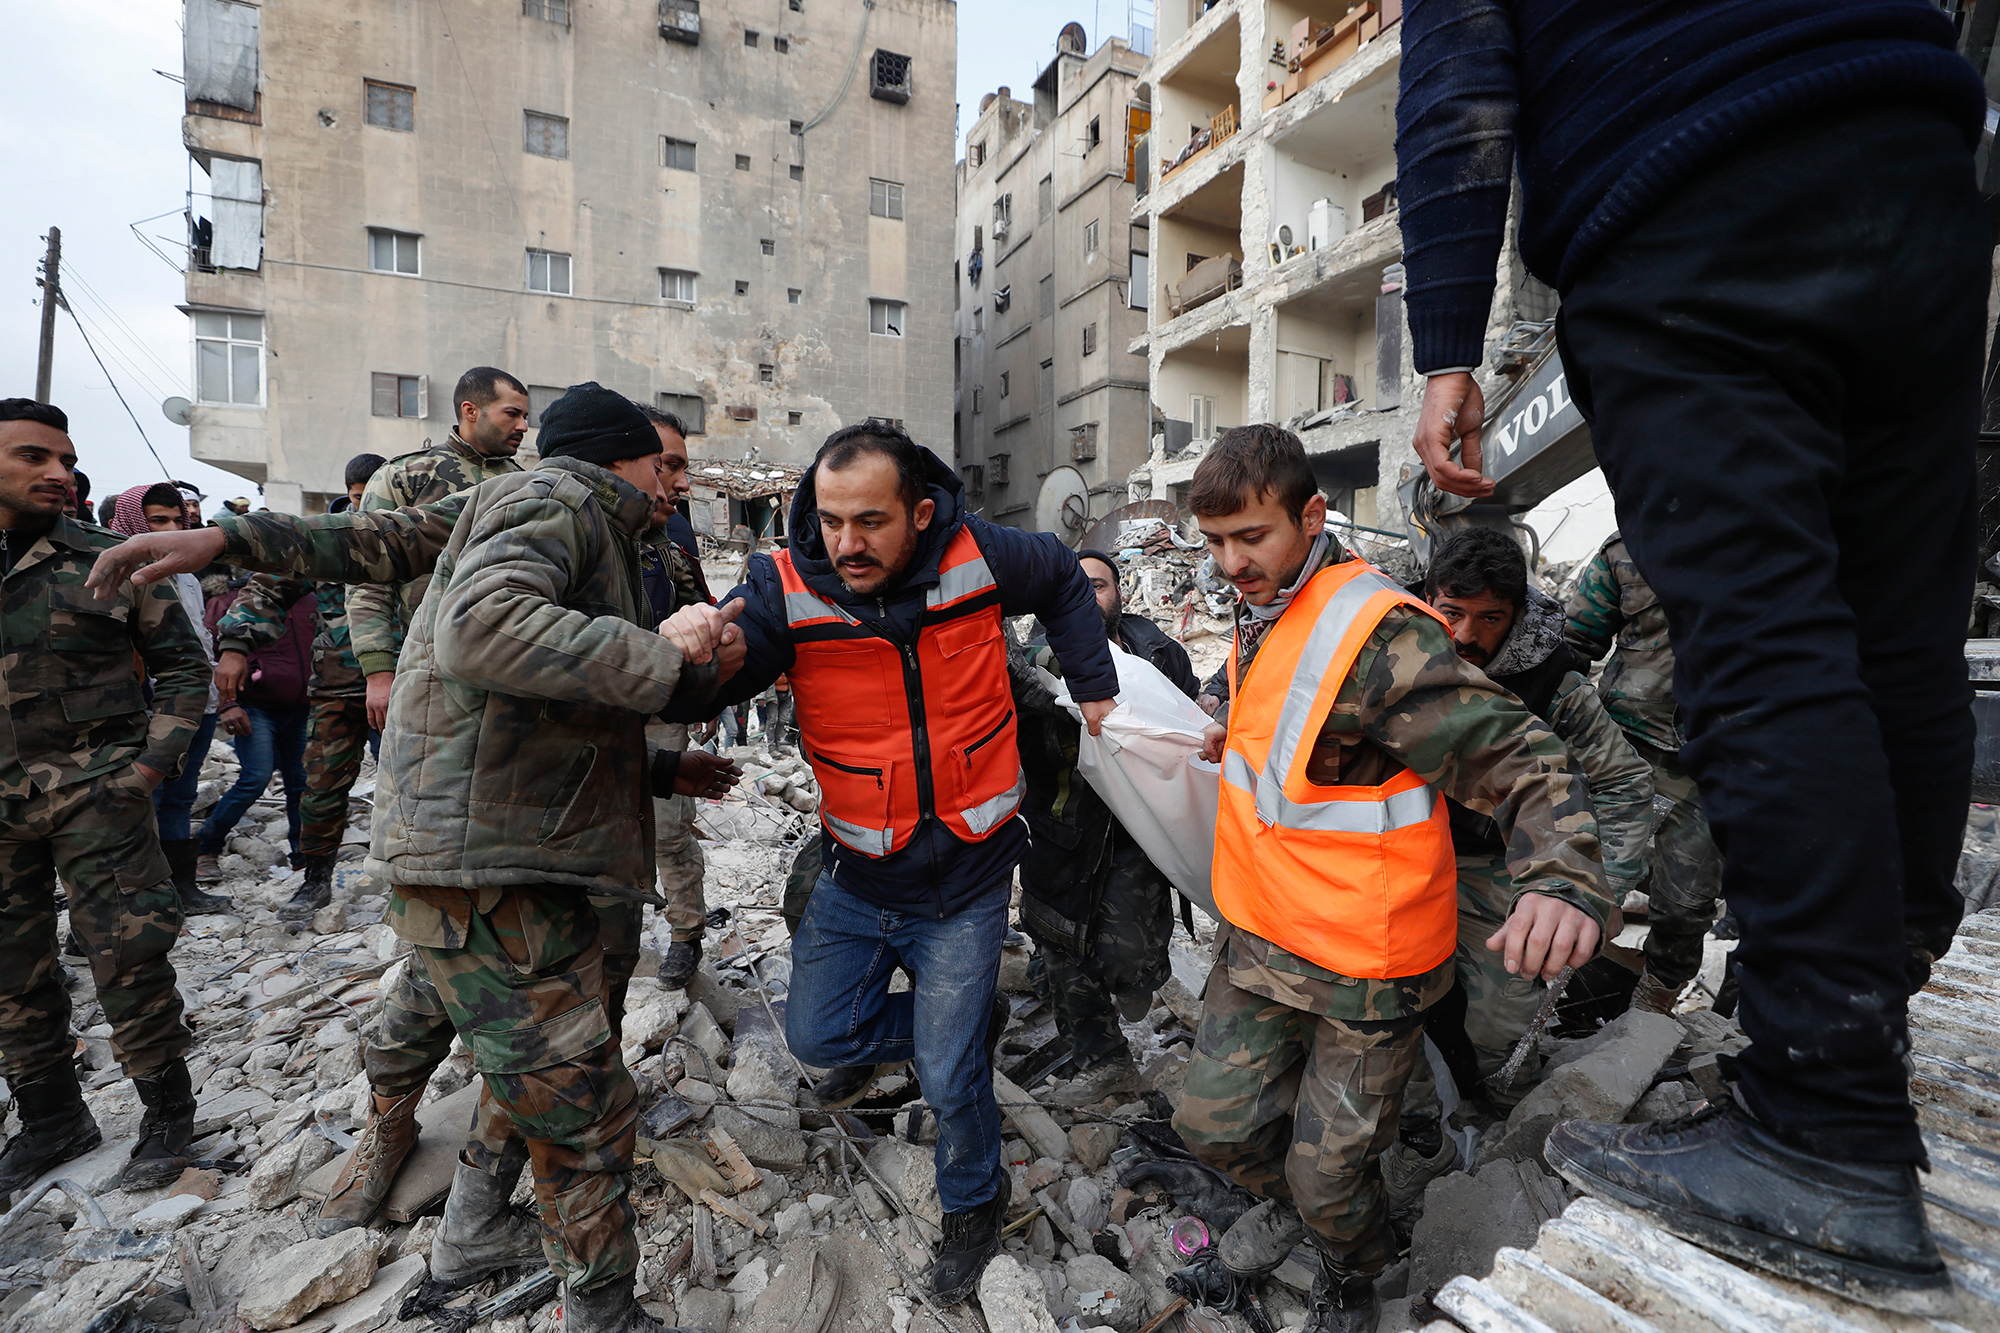 Rescue teams carry the body of a victim from a destroyed building in Aleppo, Syria, on Tuesday, February 7.